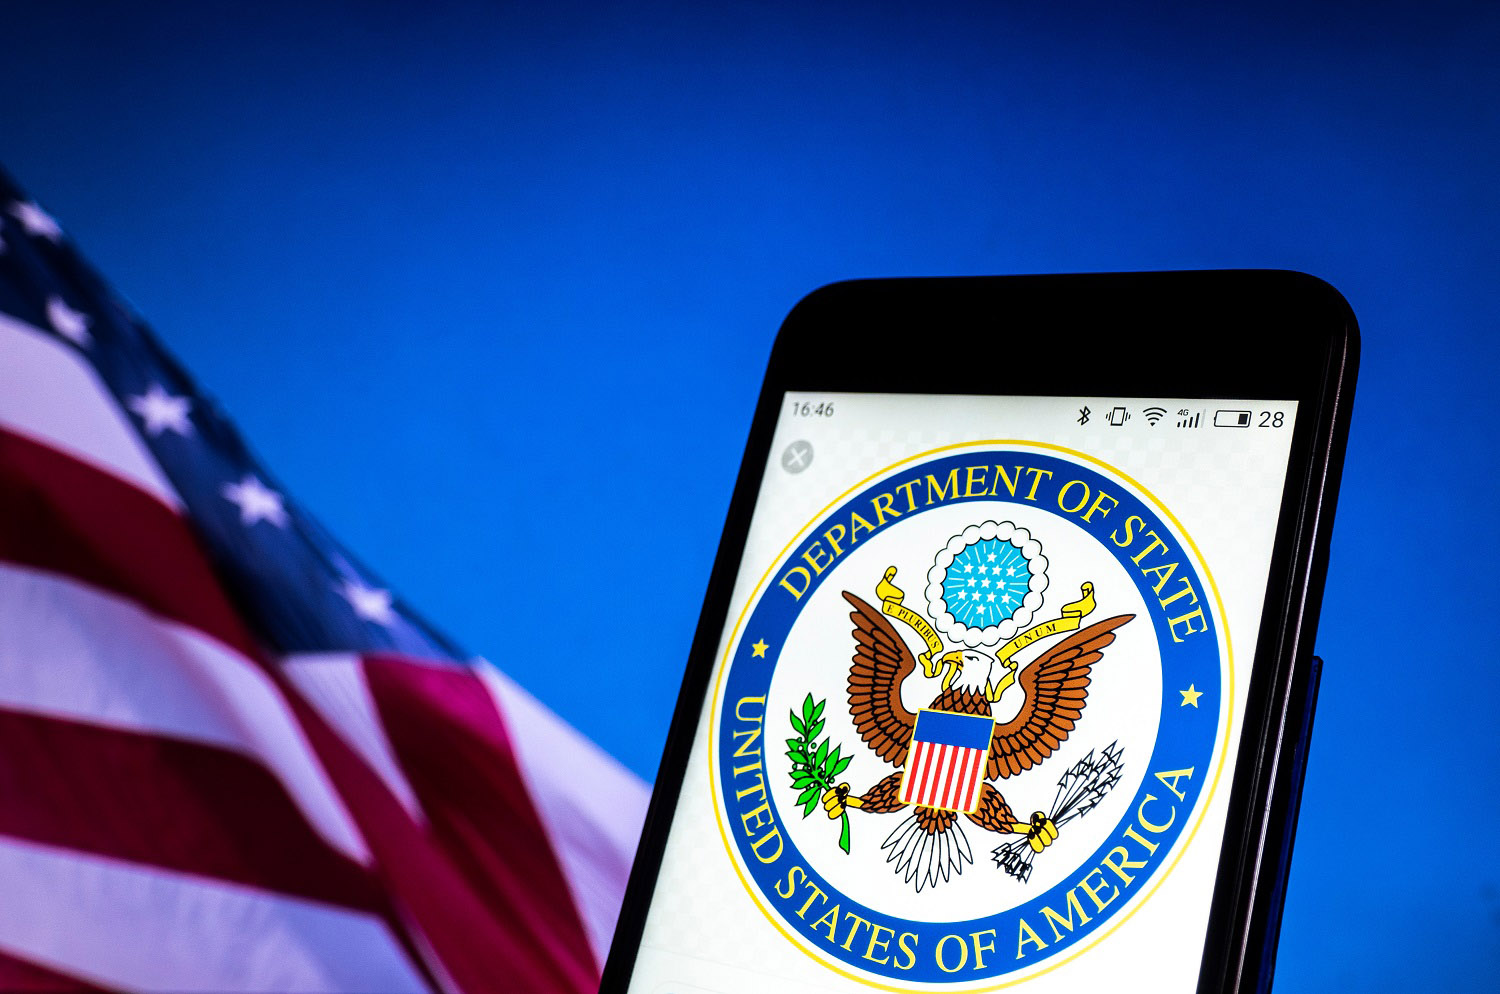 Department of State logo is seen on smartphone